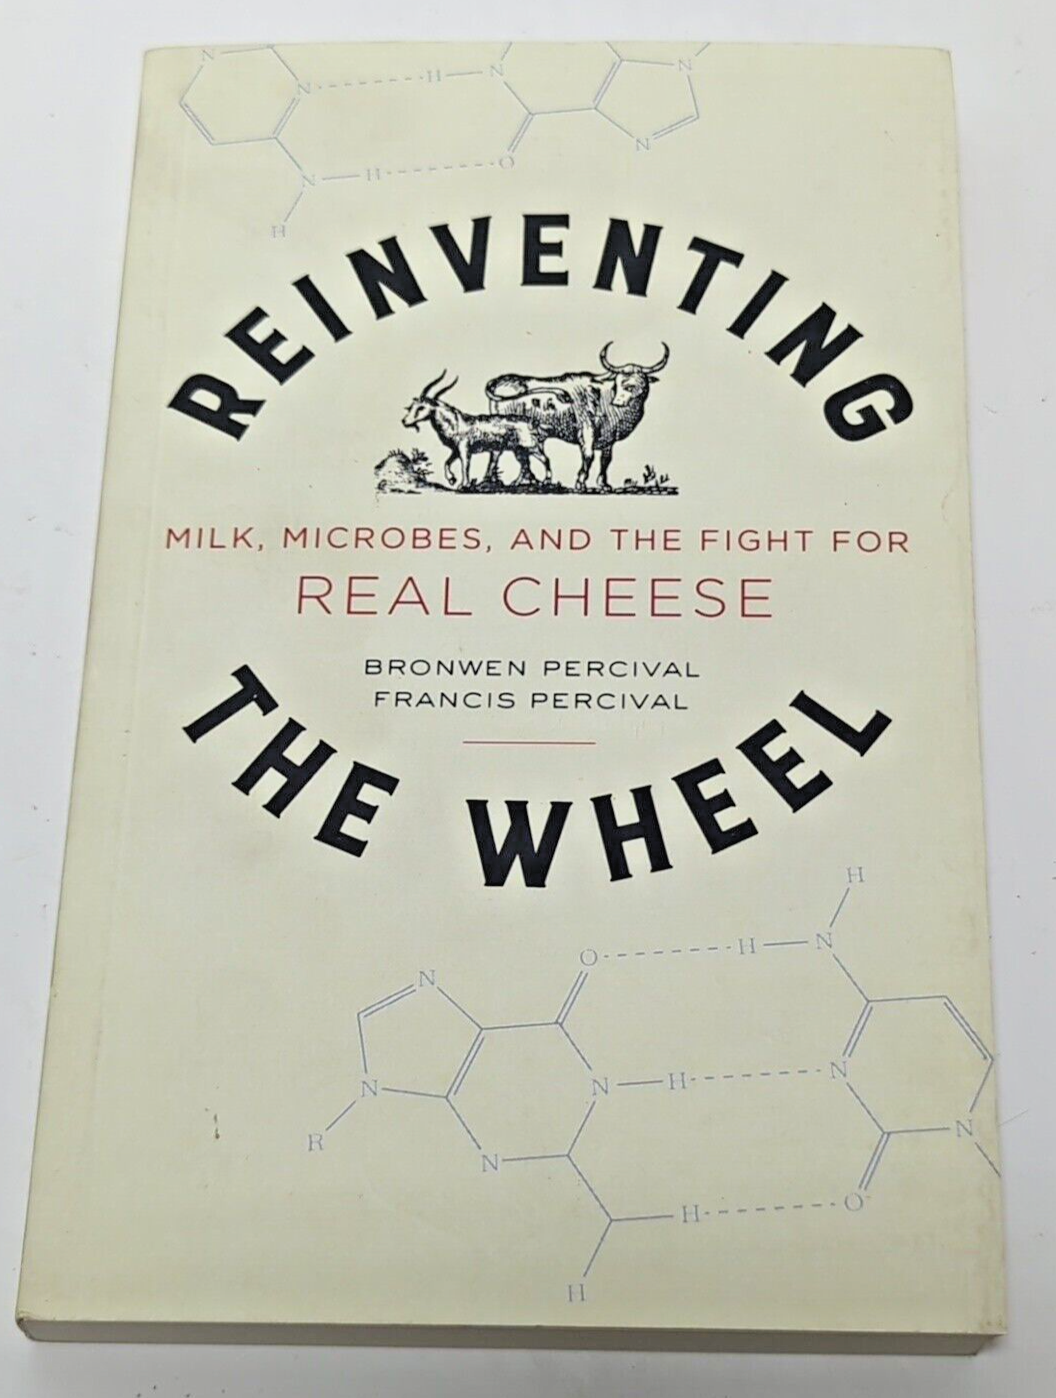 Primary image for Reinventing the Wheel: Milk, Microbes, and the Fight for Real Cheese by Bronwen